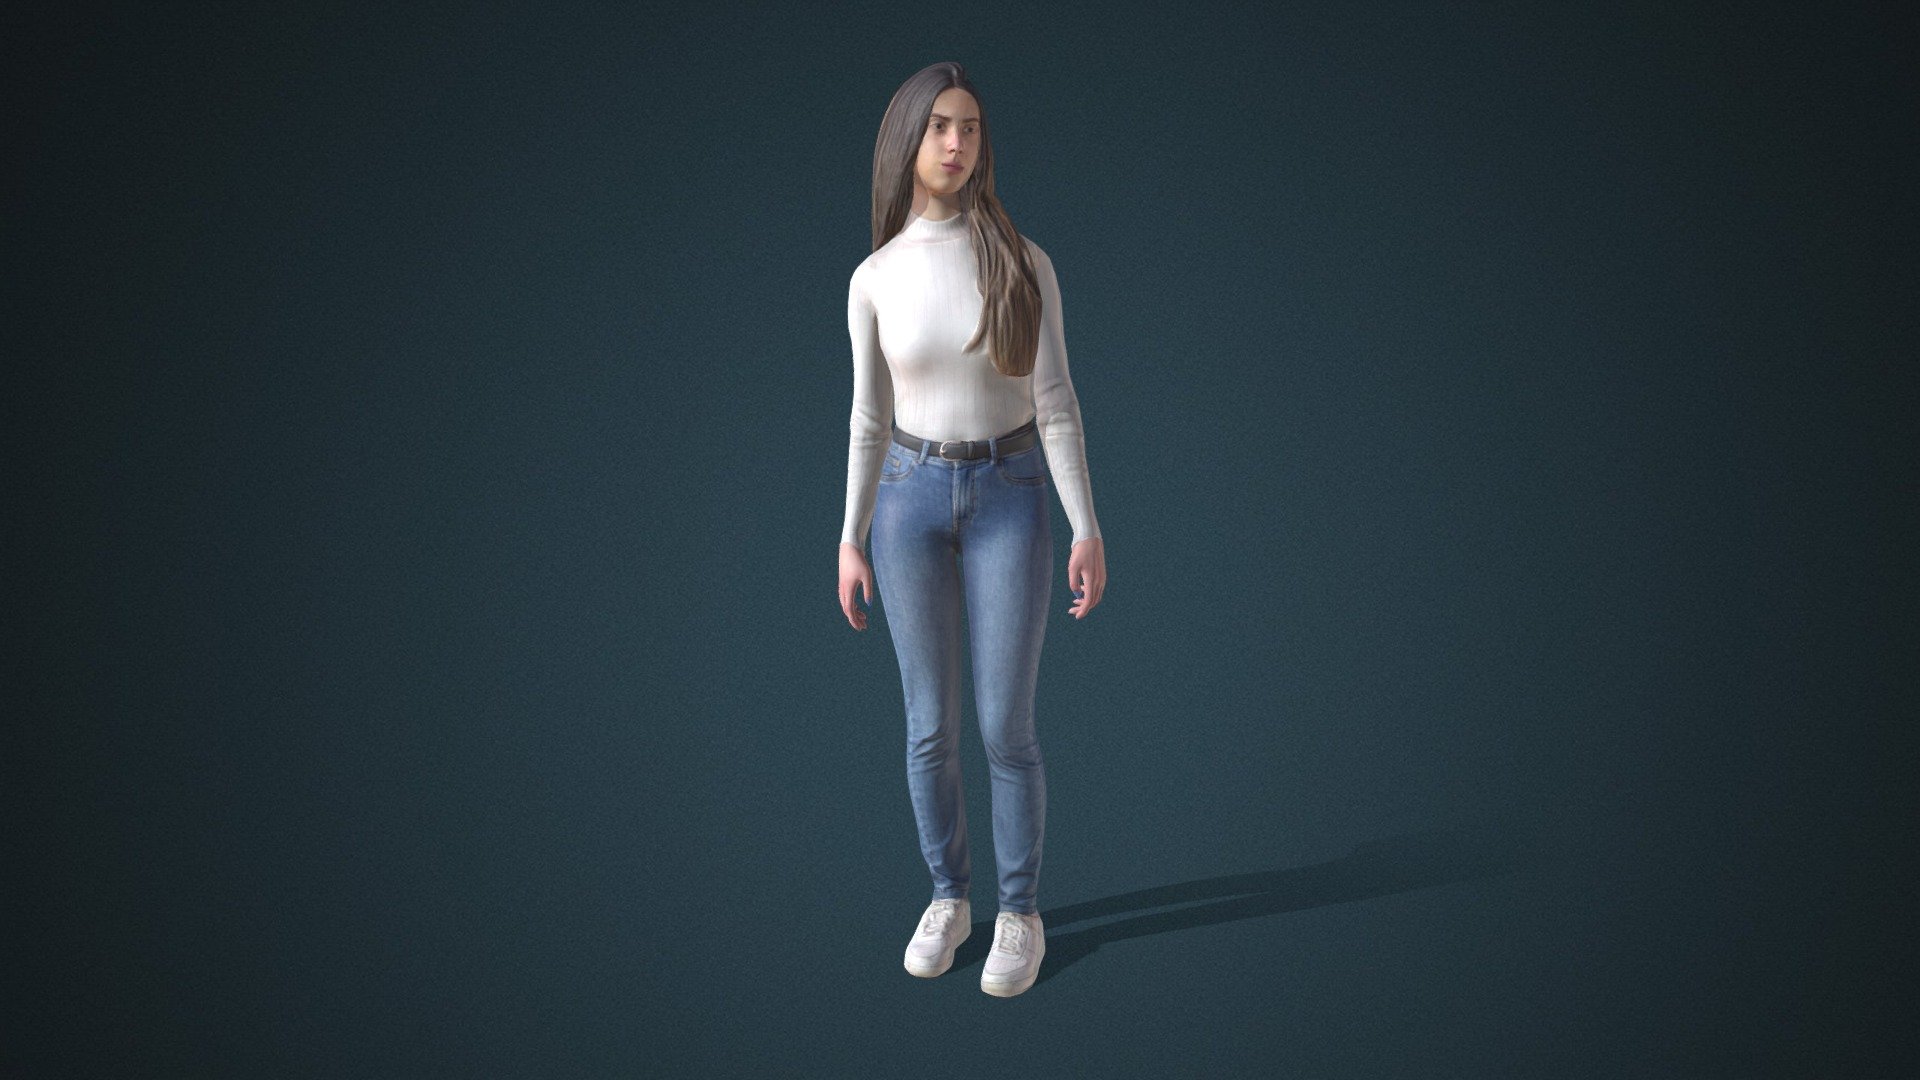 Do you like this model?  Free Download more models, motions and auto rigging tool AccuRIG (Value: $150+) on ActorCore
 

This model includes 2 mocap animations: Modern_F_Look around,Modern_F_Walk. Get more free motions

Design for high-performance crowd animation.

Buy full pack and Save 20%+: Young Fashion Vol.3


SPECIFICATIONS

✔ Geometry : 7K~10K Quads, one mesh

✔ Material : One material with changeable colors.

✔ Texture Resolution : 4K

✔ Shader : PBR, Diffuse, Normal, Roughness, Metallic, Opacity

✔ Rigged : Facial and Body (shoulders, fingers, toes, eyeballs, jaw)

✔ Blendshape : 122 for facial expressions and lipsync

✔ Compatible with iClone AccuLips, Facial ExPlus, and traditional lip-sync.


About Reallusion ActorCore

ActorCore offers the highest quality 3D asset libraries for mocap motions and animated 3D humans for crowd rendering 3d model